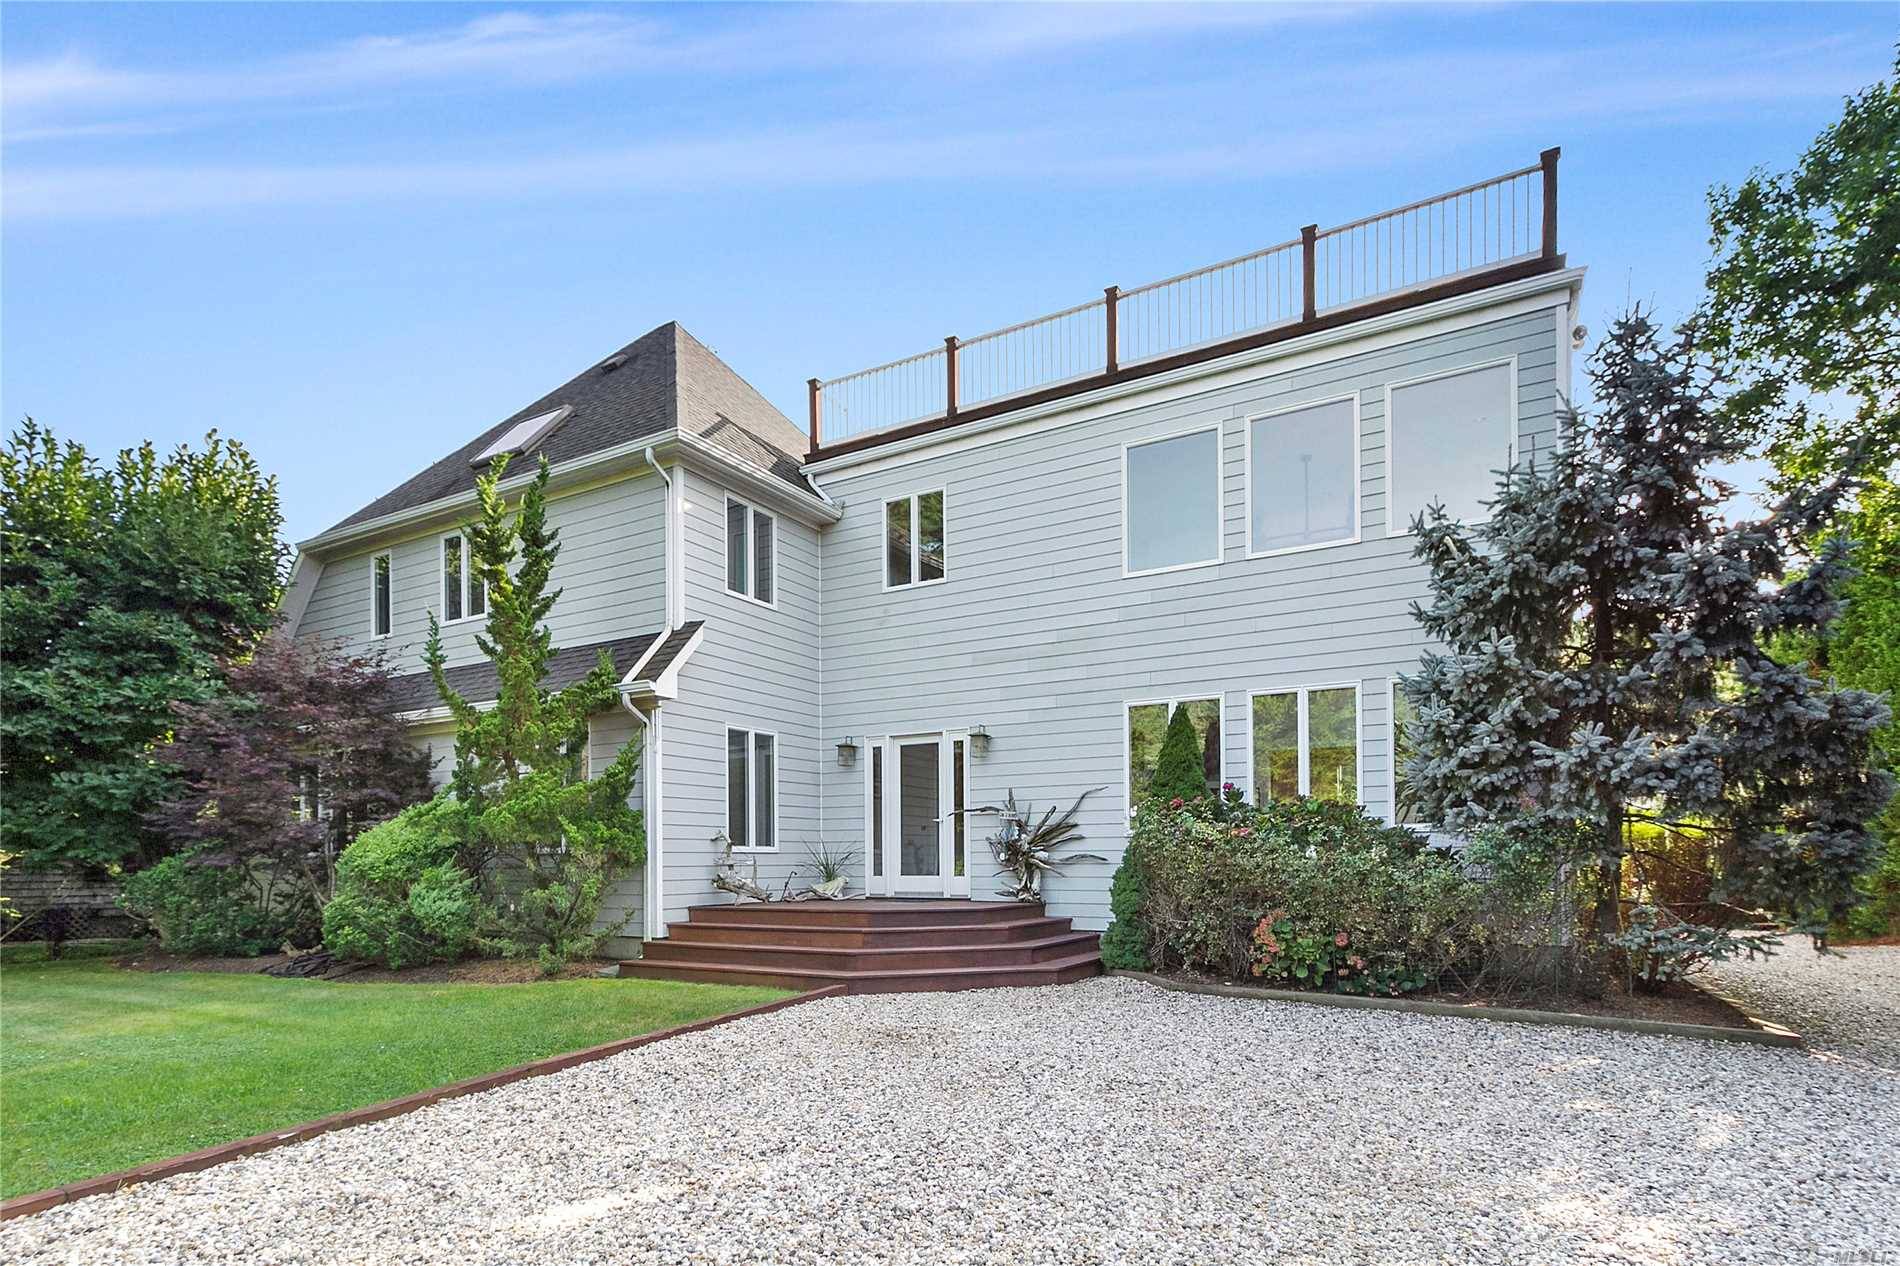 This double lot, double height modern home is tucked away in Amagansett North, 4 lots from the Gardiner Bay beach access.